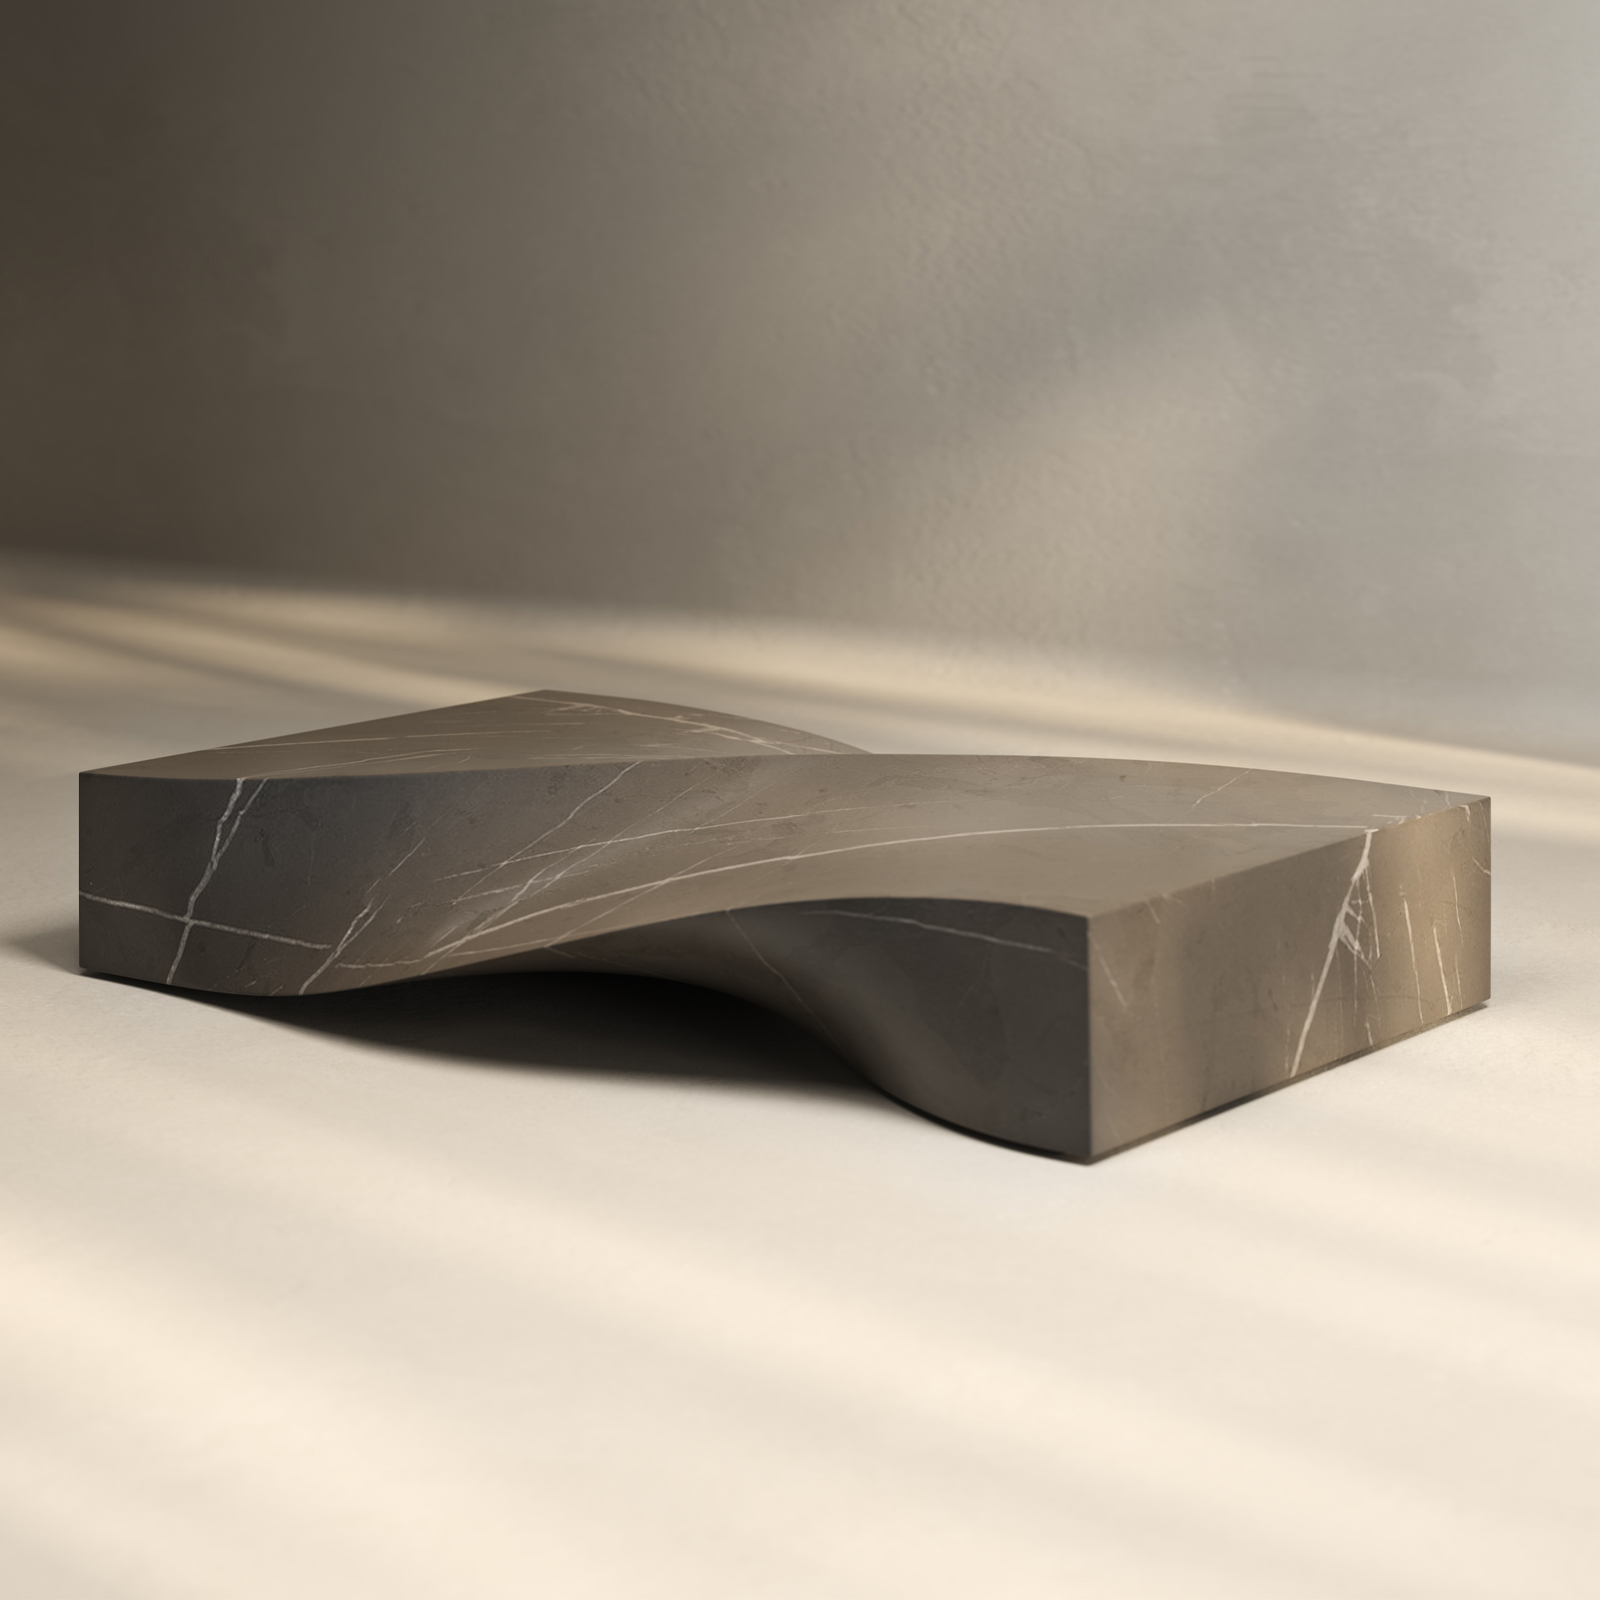 Soul Sculpture Coffee Table_ Marble_Veronica Mar_1600 x 1600